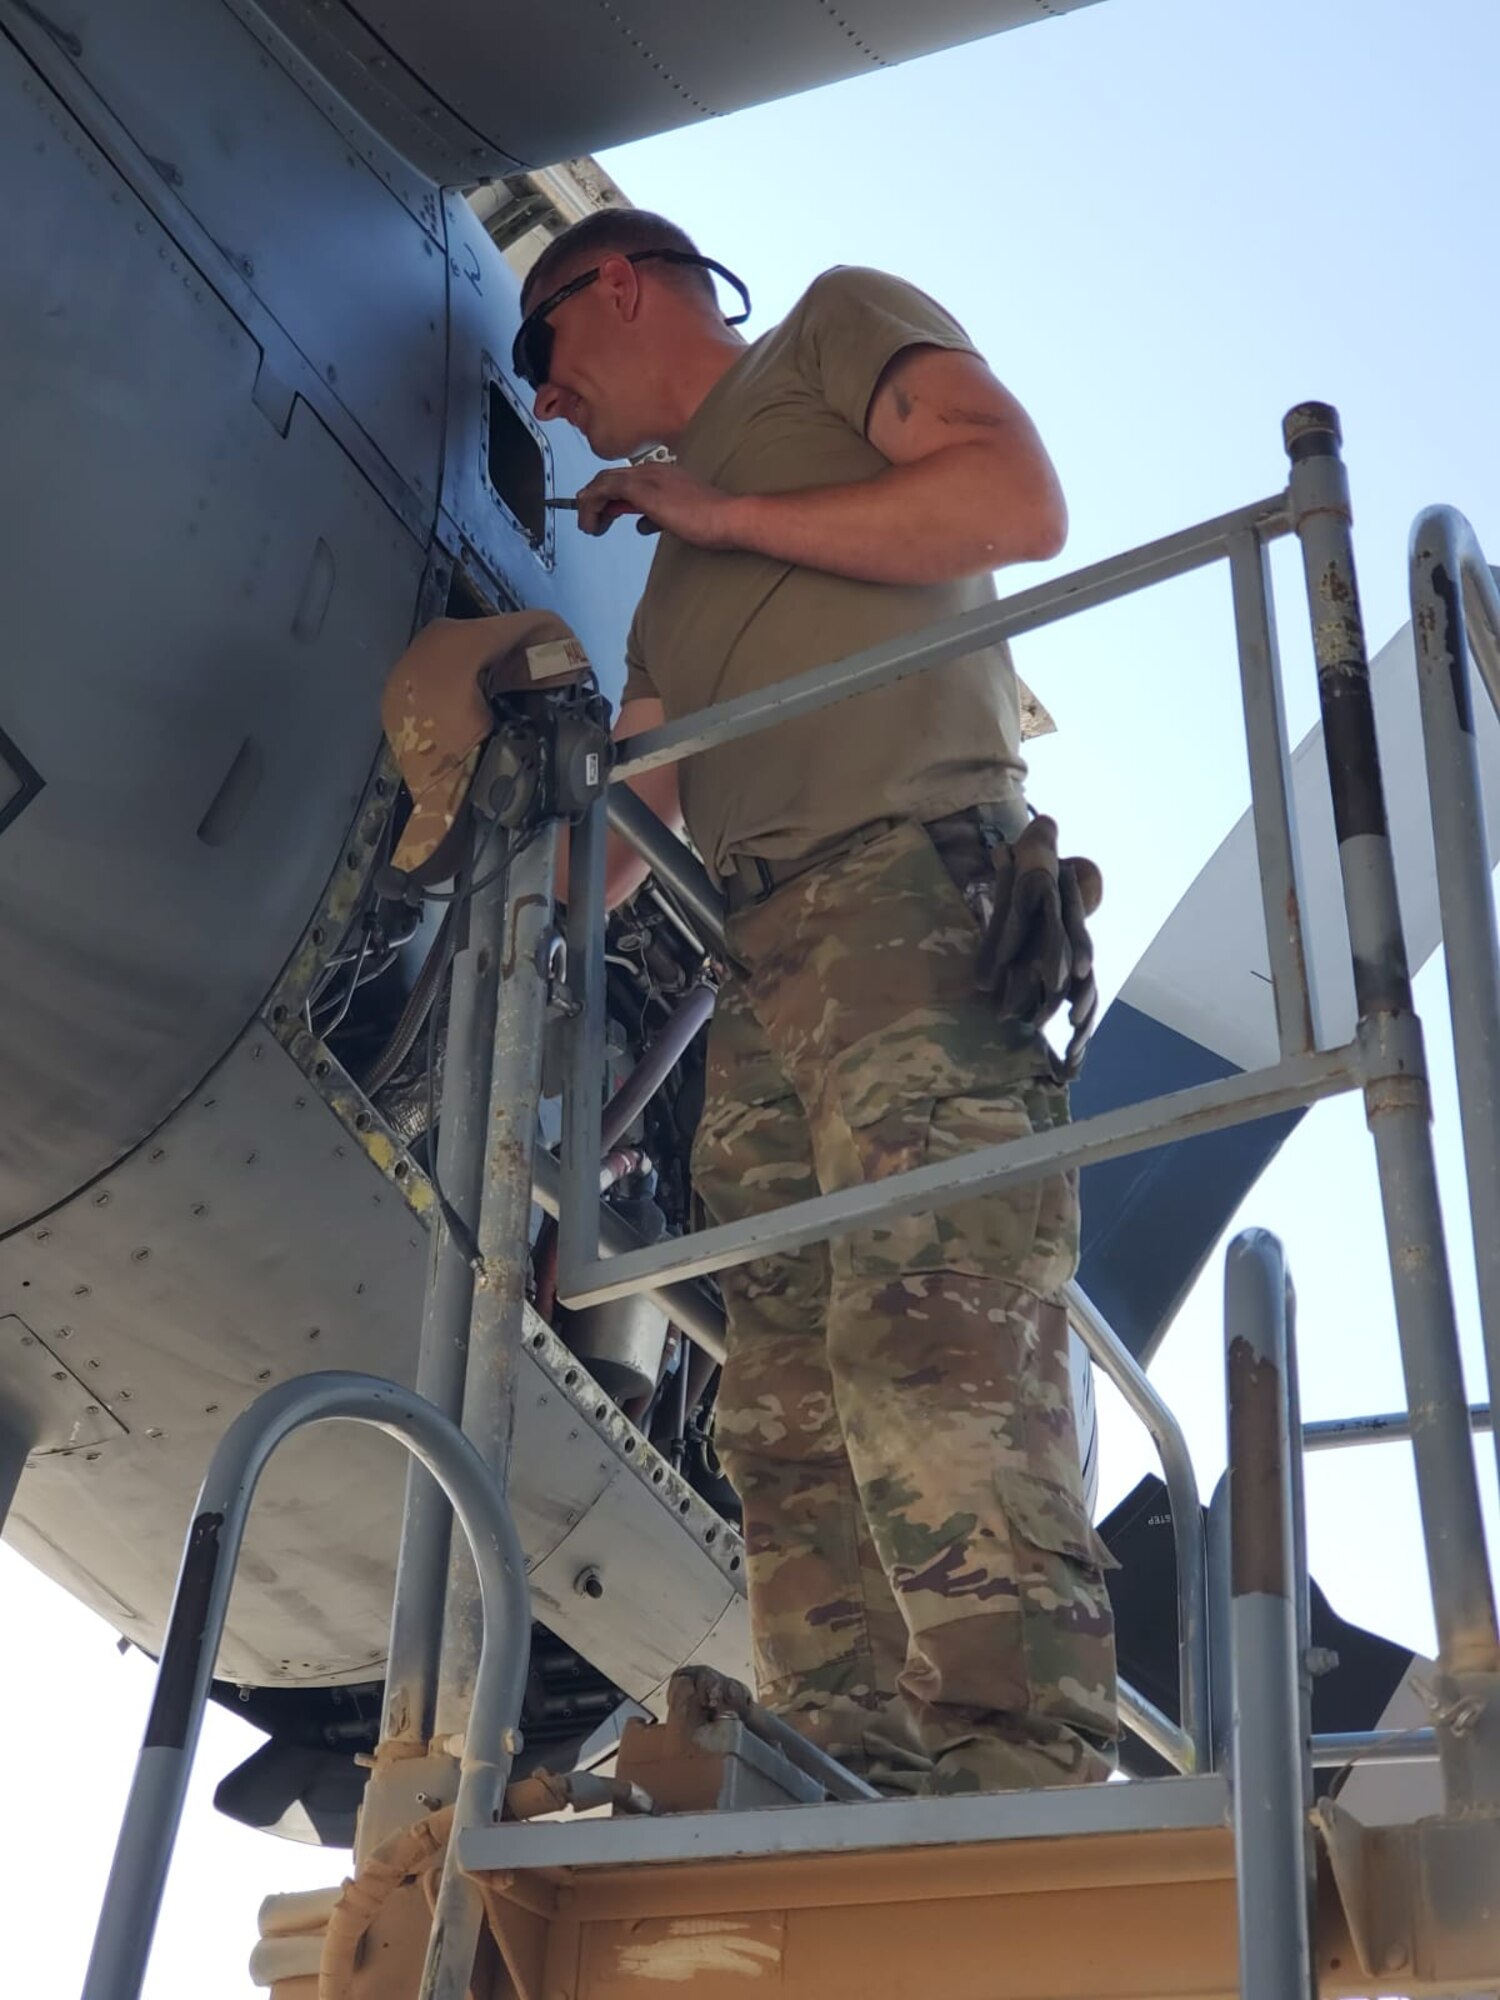 U.S. Air Force Tech. Sgt. Jonathan Hall, a propulsion technician assigned to the 386th Expeditionary Aircraft Maintenance Squadron and deployed from Maxwell Air Force Base, Alabama, trouble shoots a bleed air leak on a C-130 Hercules. The EAMXS works 24-hour operations year-round to keep the C-130 Hercules’ in flight to accomplish the mission of fight to win today and to provide warfighter support in the area of responsibility. (Courtesy Photo)